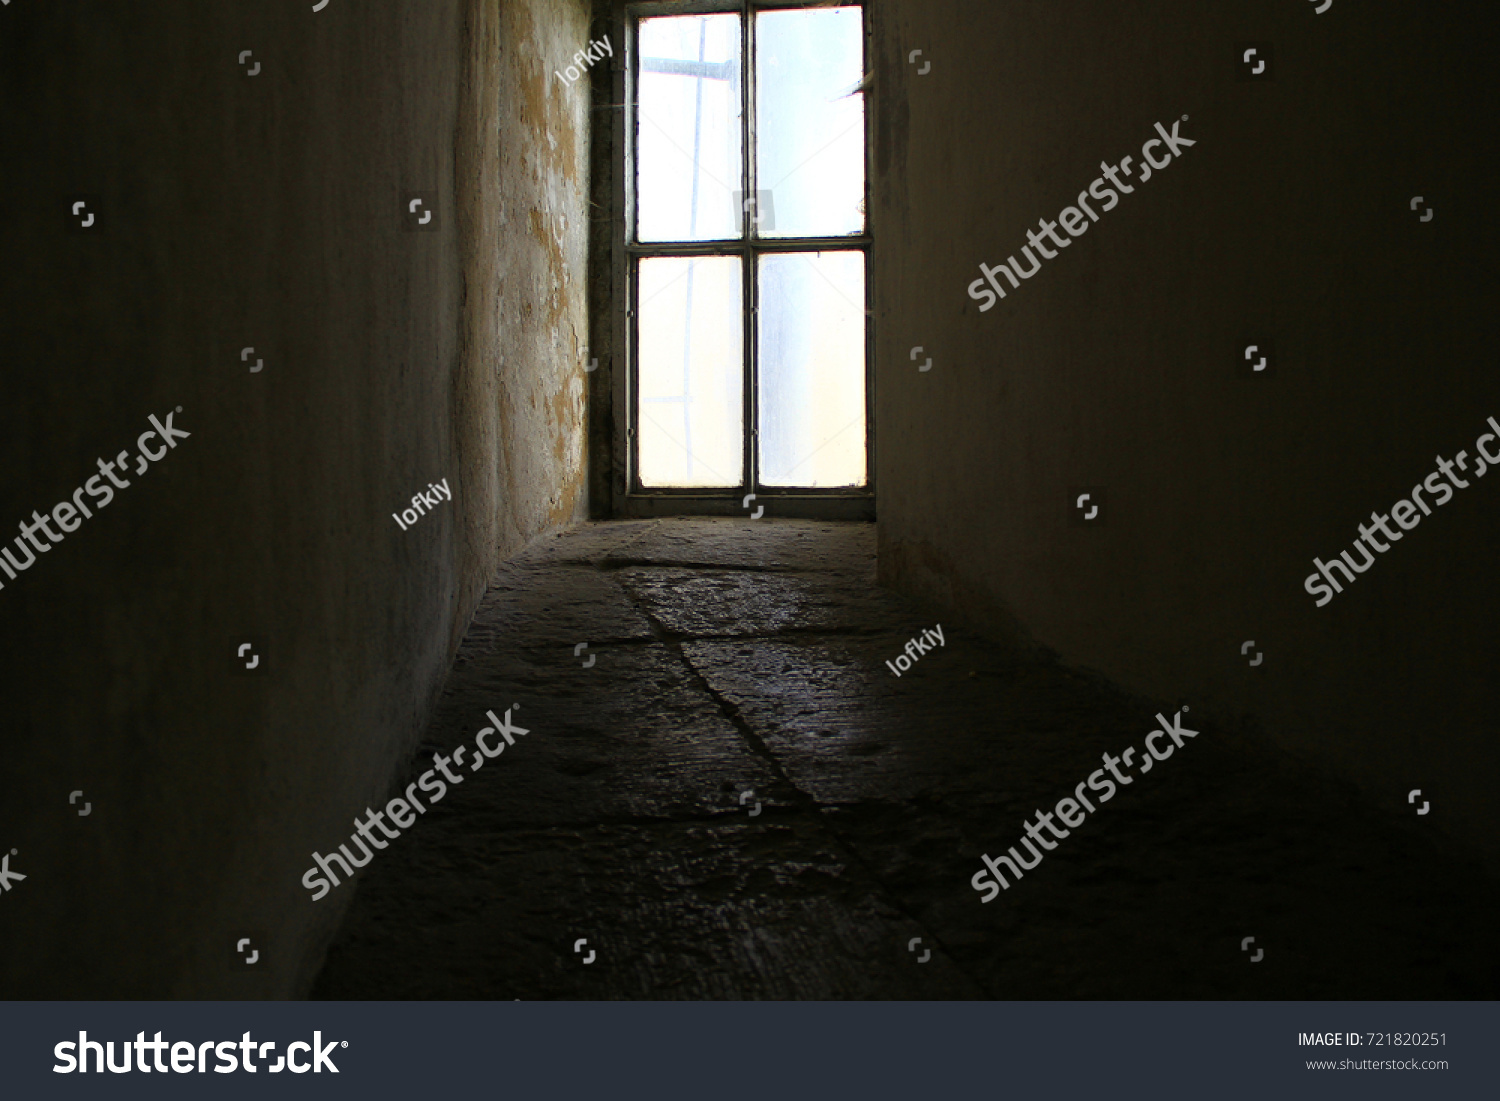 An ancient window at the end of a stone corridor #721820251